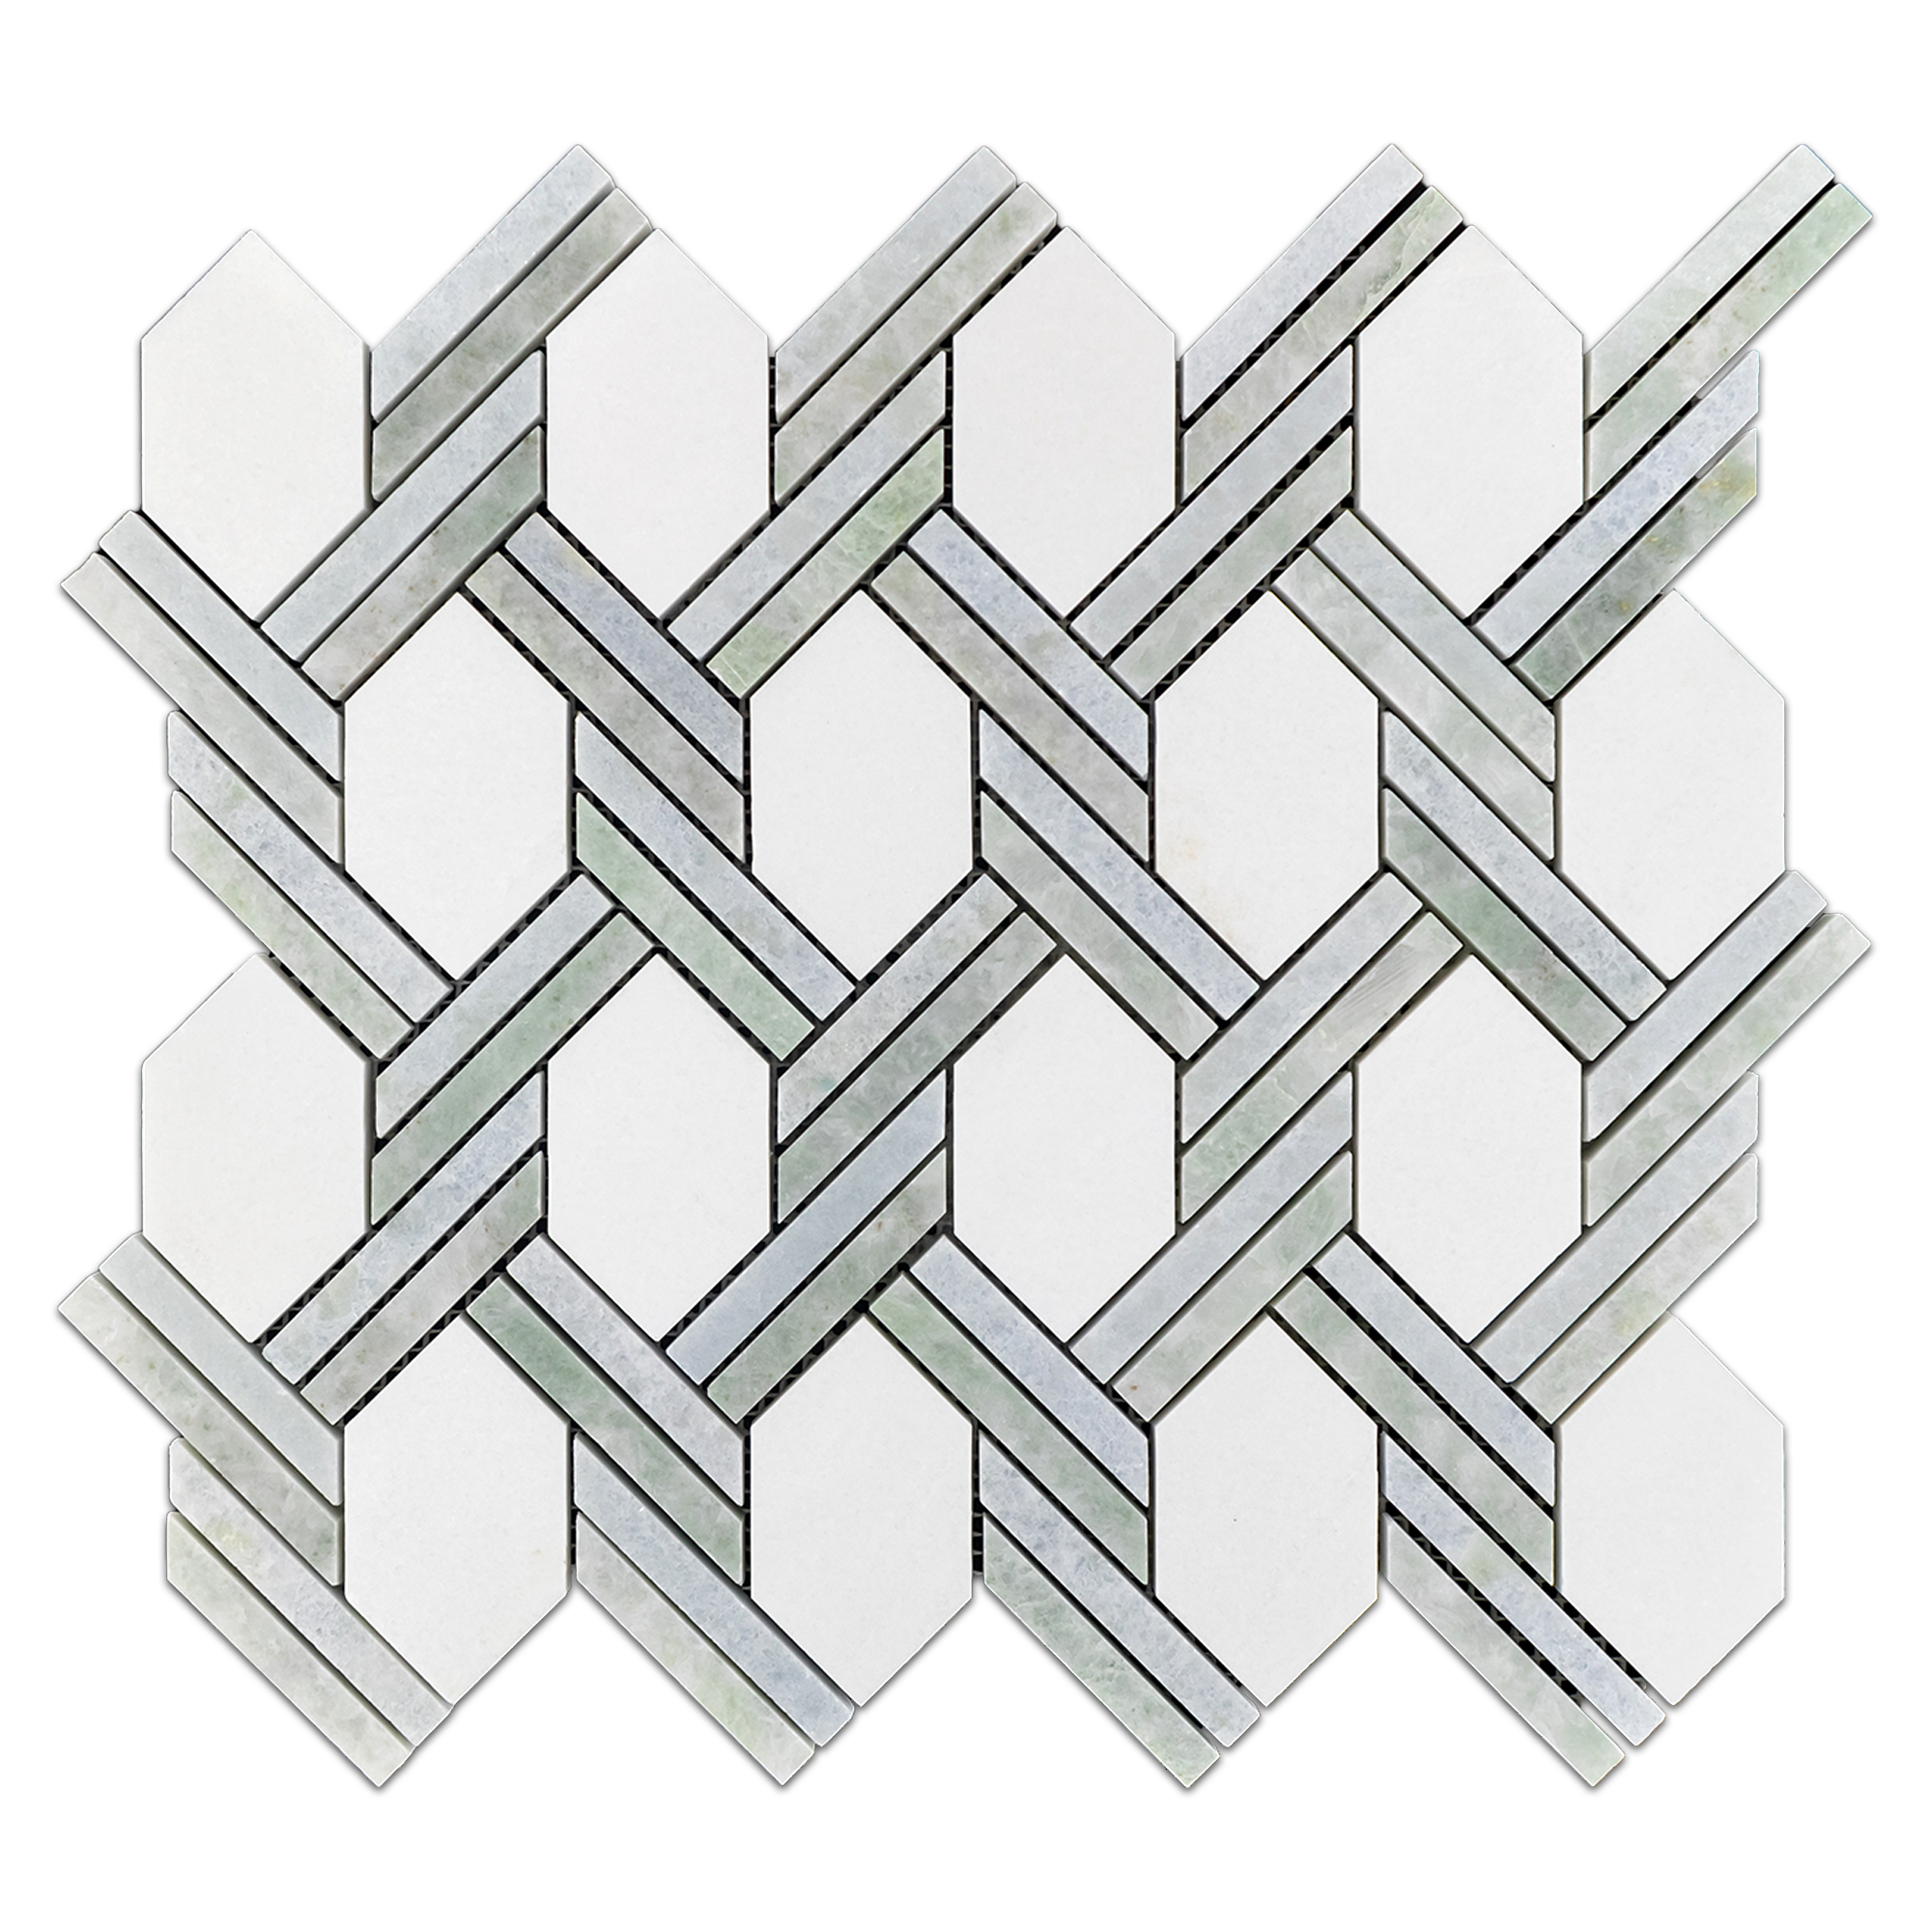 Elon White Thassos Blue Celeste Ming Green Marble Braided Picket Field Mosaic 11.625x12.875x0.375 Polished - Surface Group International Product